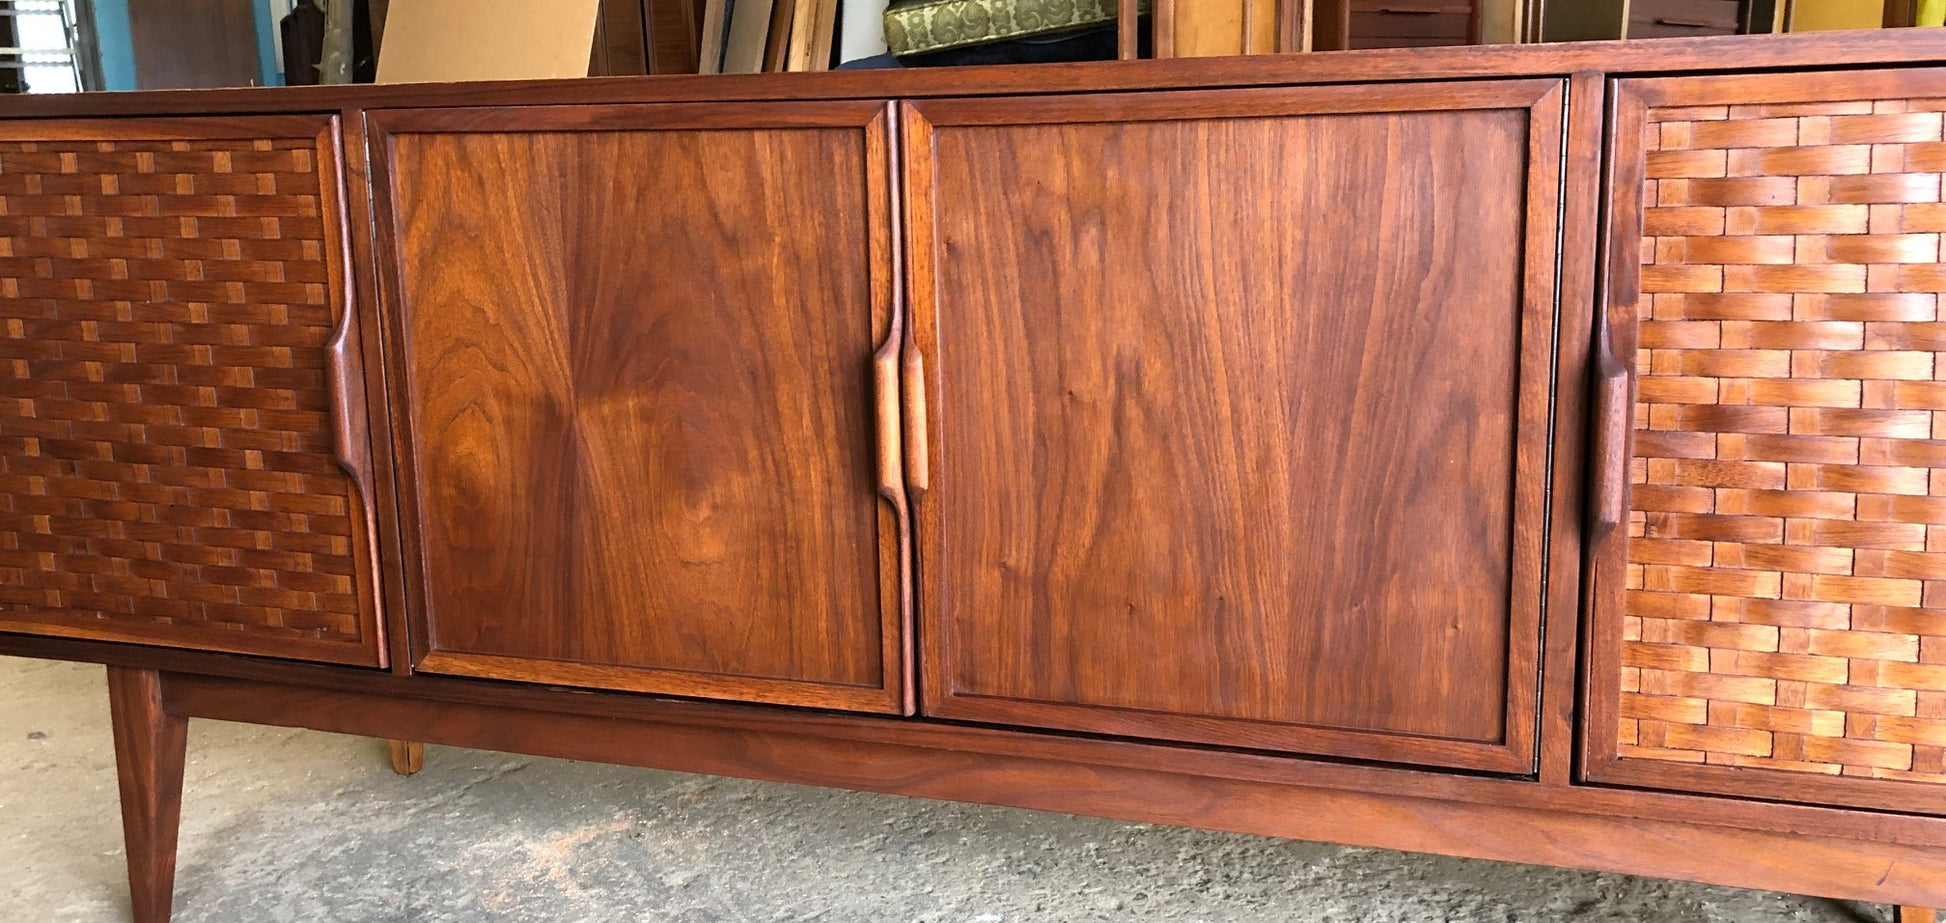 REFINISHED MCM Walnut Credenza with woven front PERFECT, 6ft - Mid Century Modern Toronto